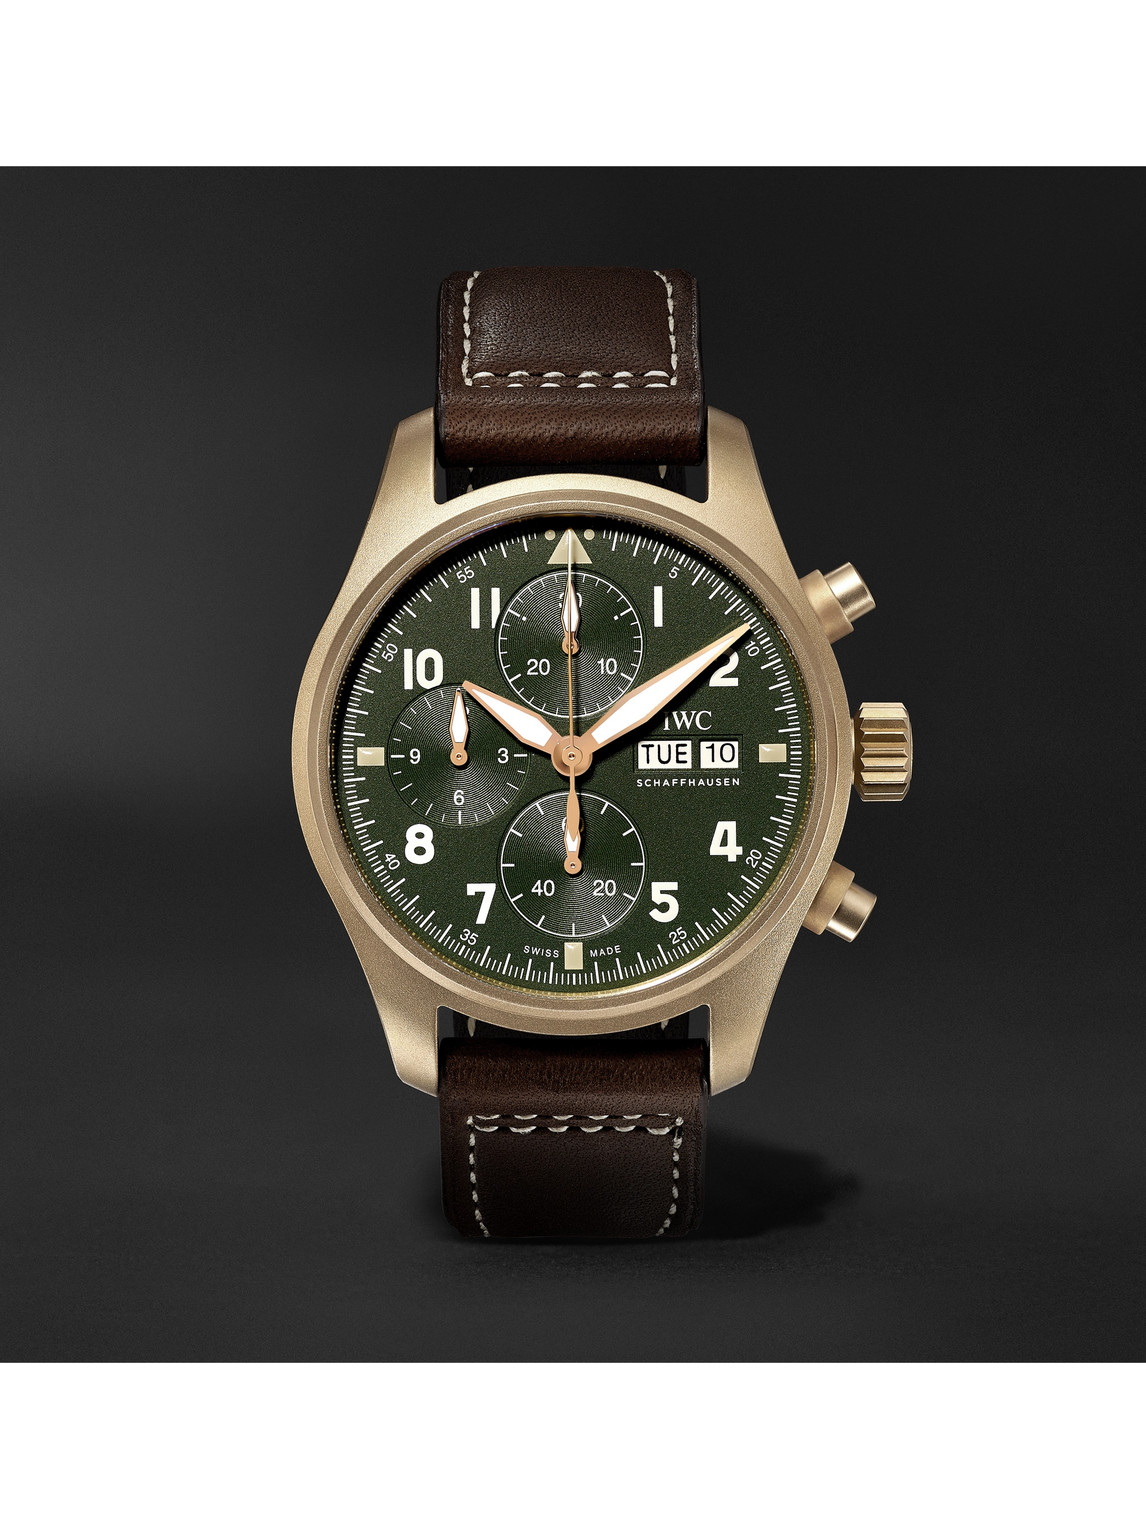 Iwc Schaffhausen Pilot's Spitfire Automatic Chronograph 41mm Bronze And Leather Watch, Ref. No. Iw387902 In Green